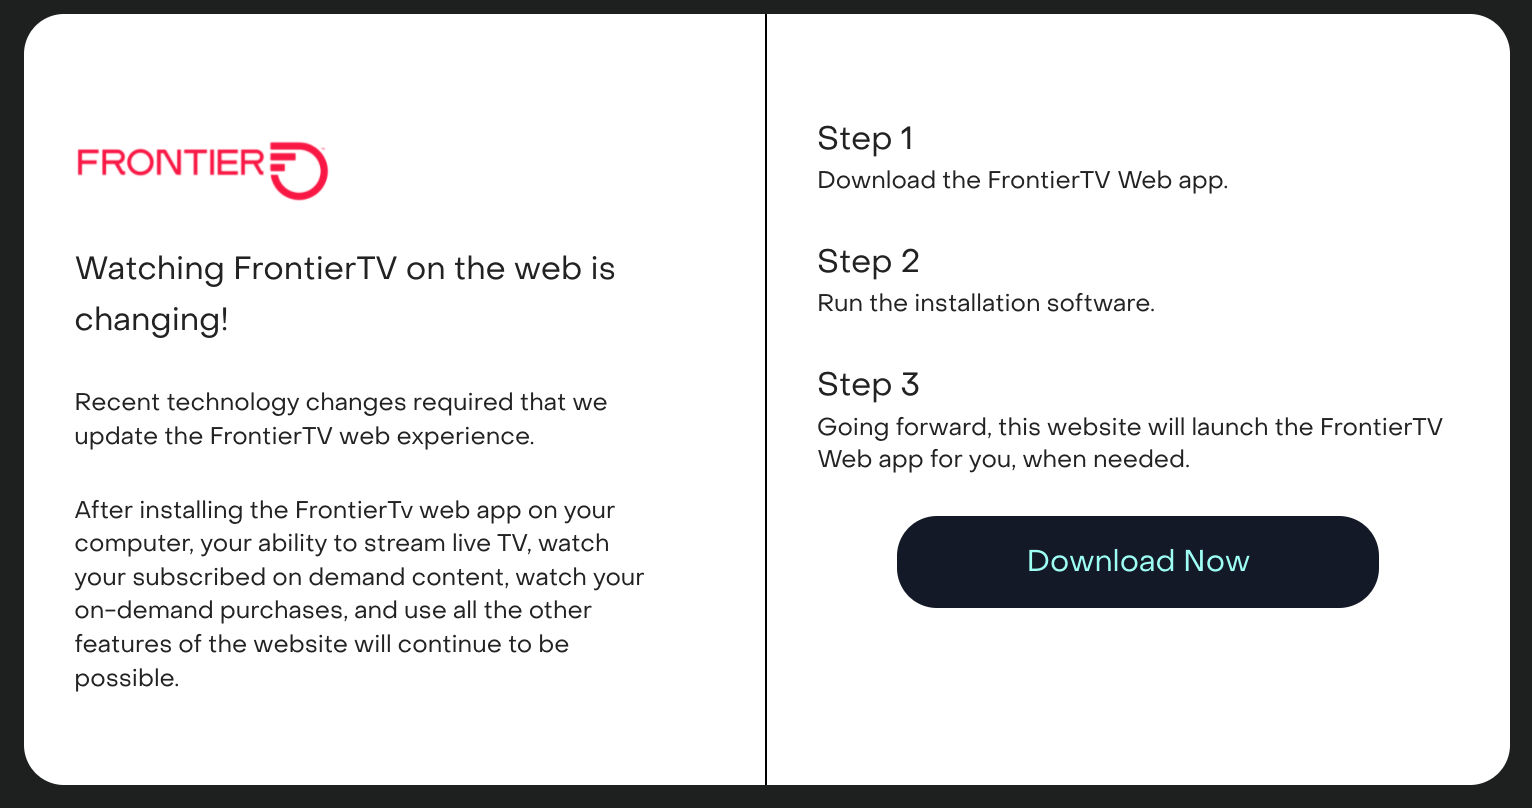 If the Frontier TV Everywhere website detects that the app is not installed, it offers you the download.